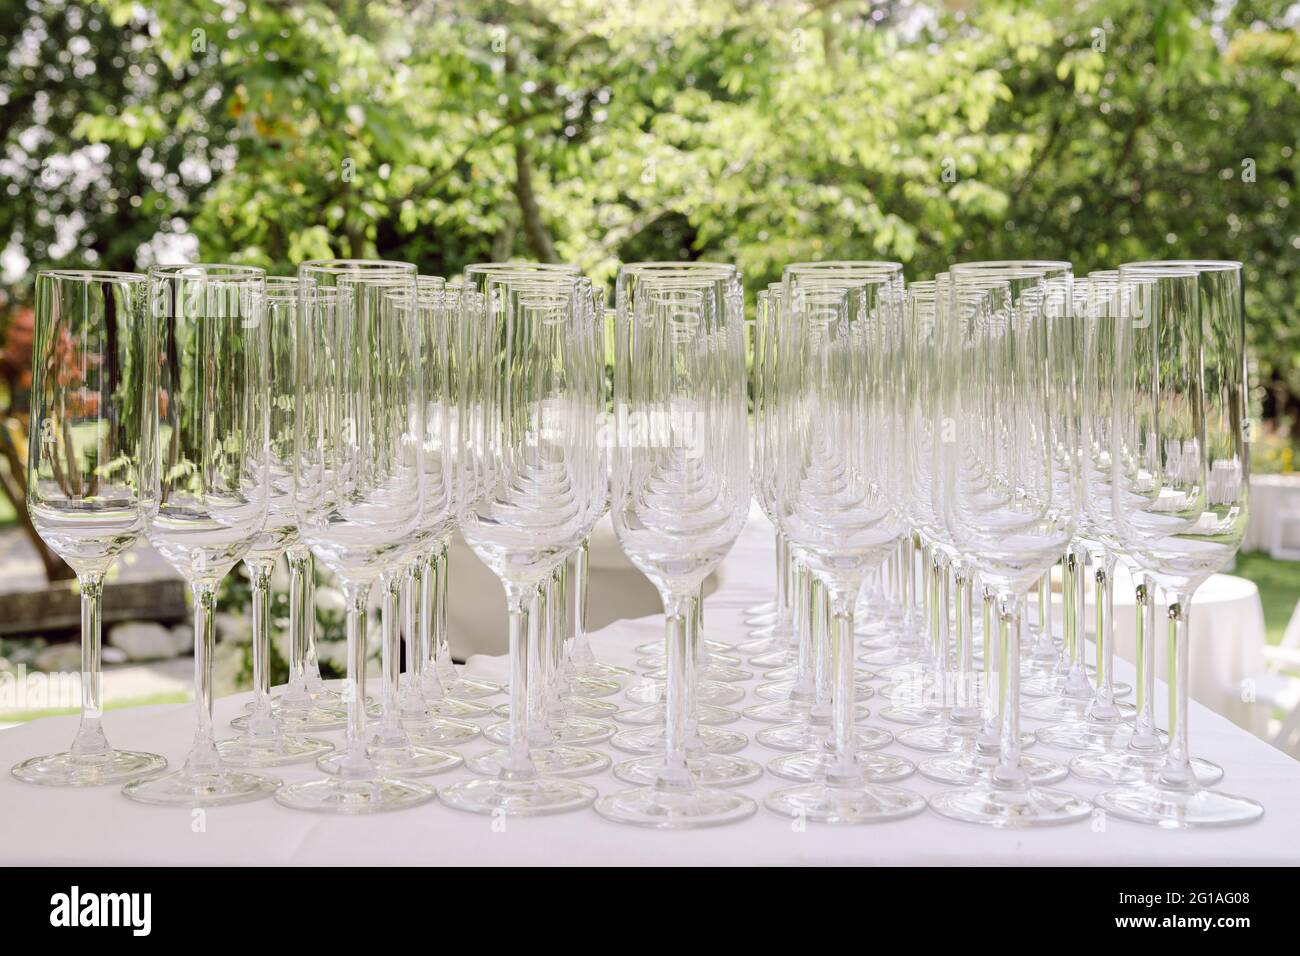 Dozens of wine glasses on a table ready to be used for a party or celebration, for a wedding catering service, with green trees in the background Stock Photo